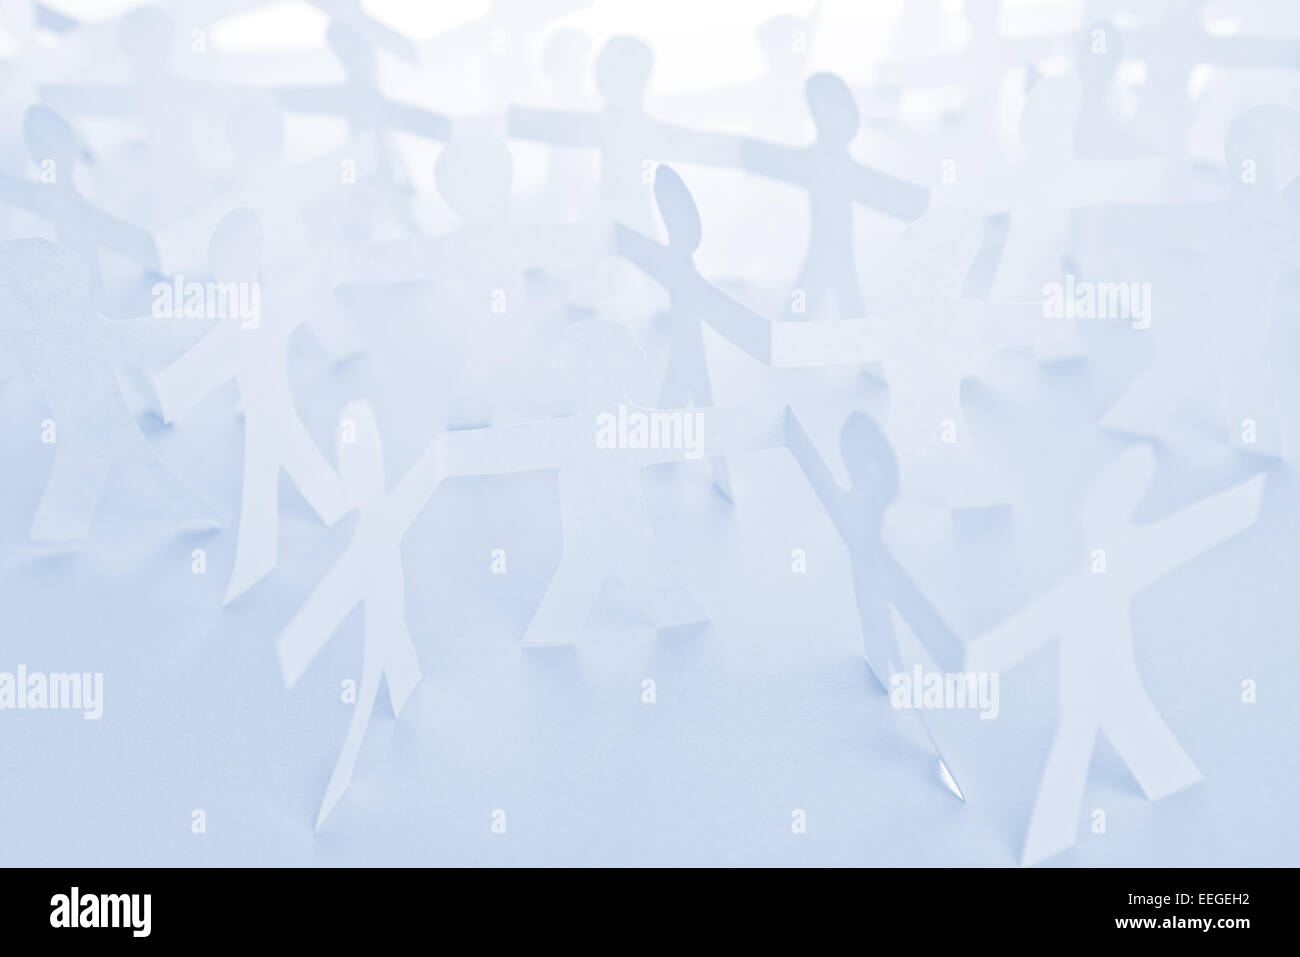 People Paper Cut Chain as Crowd or Teamwork Abstract Concept. Stock Photo